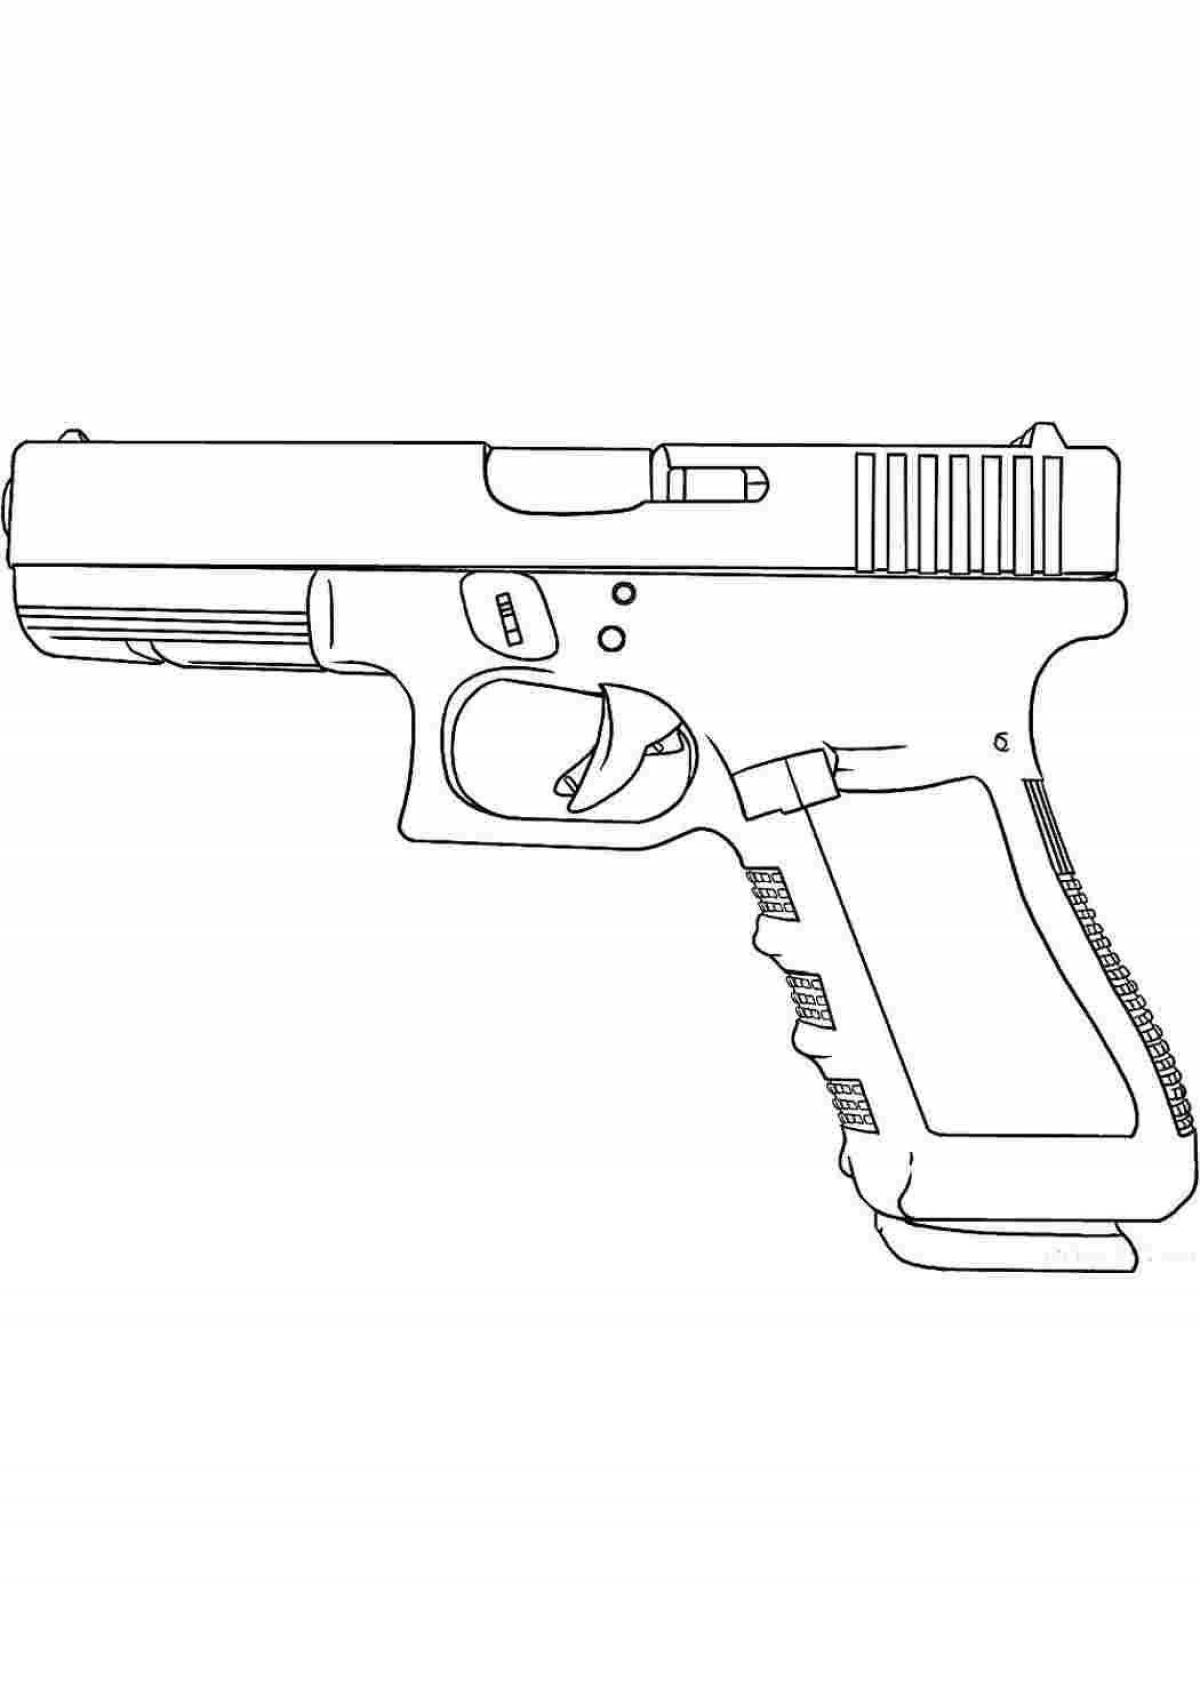 Intricate coloring of the Makarov pistol